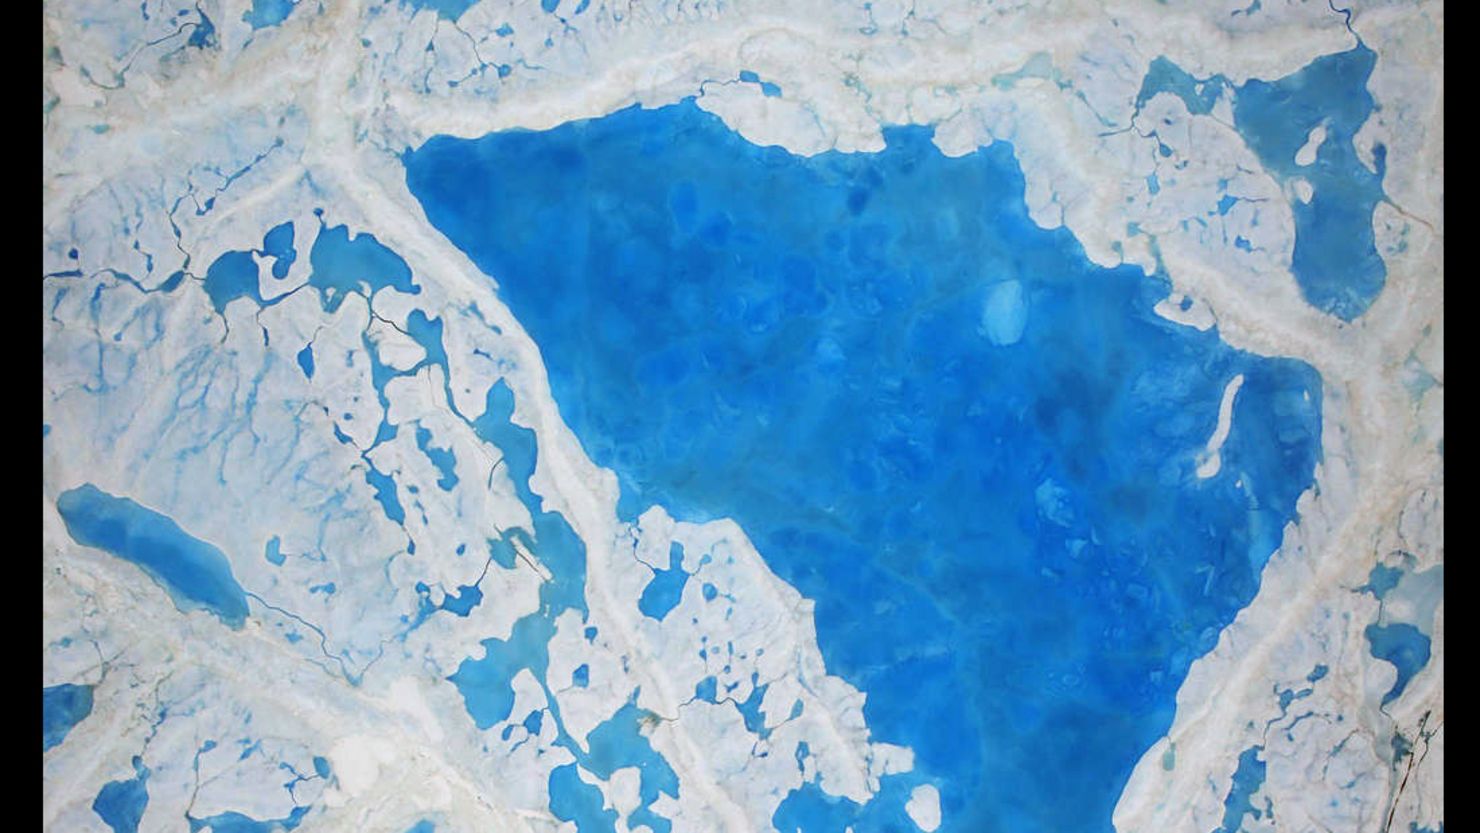 Pools of melt are becoming more common on the ice in the Arctic Sea.